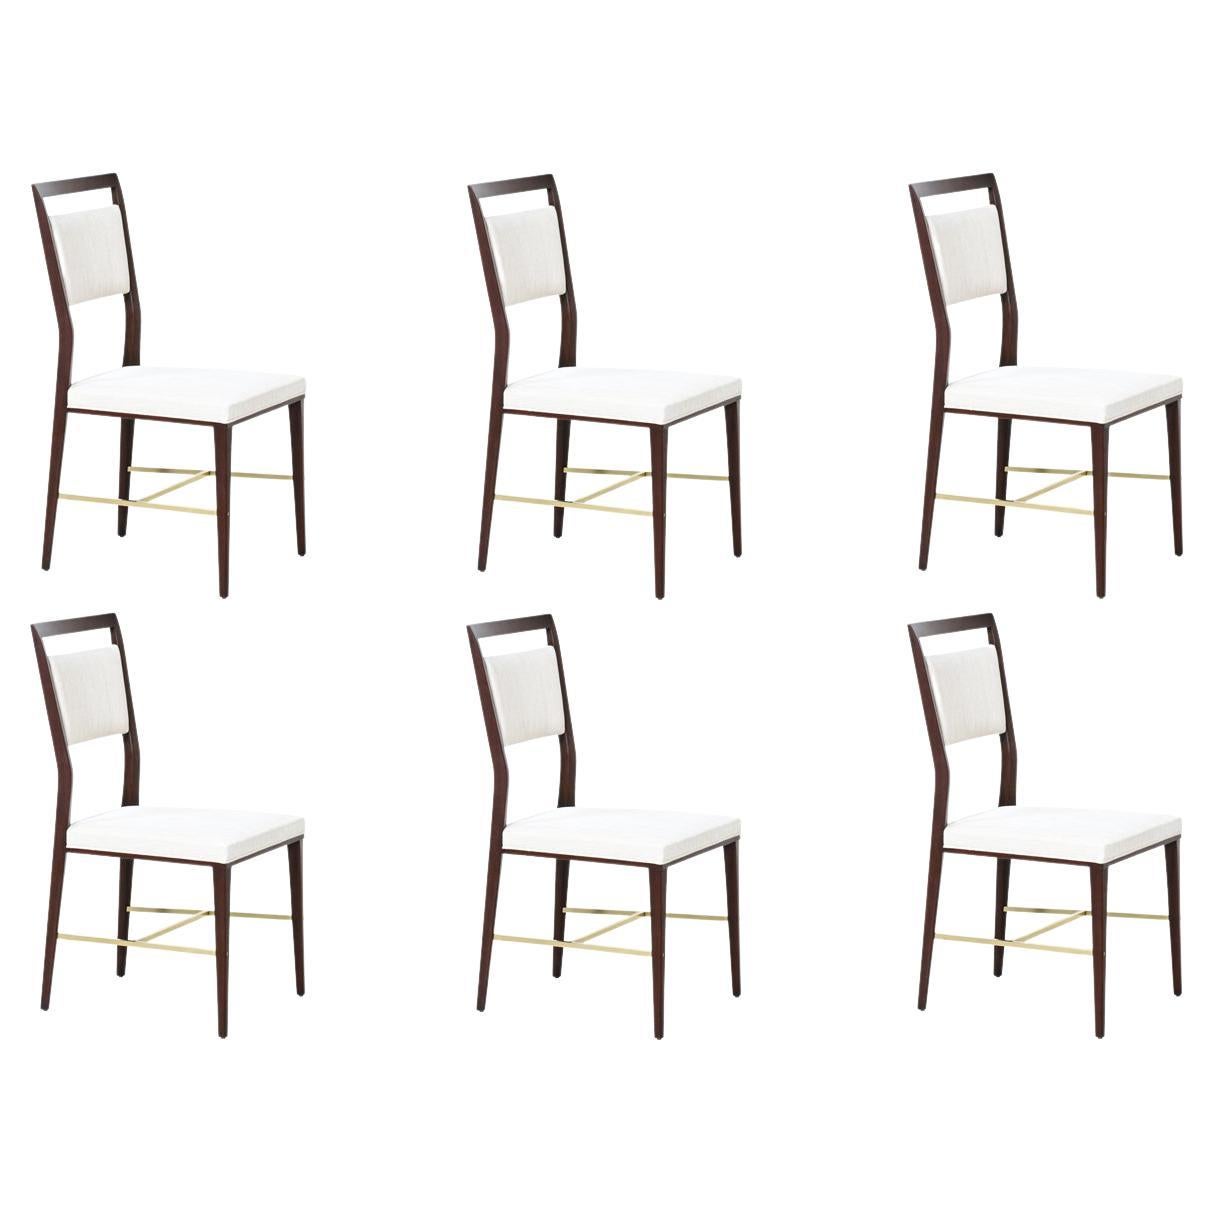 Paul McCobb "Irwin Collection" Dining Chairs with Brass Accents